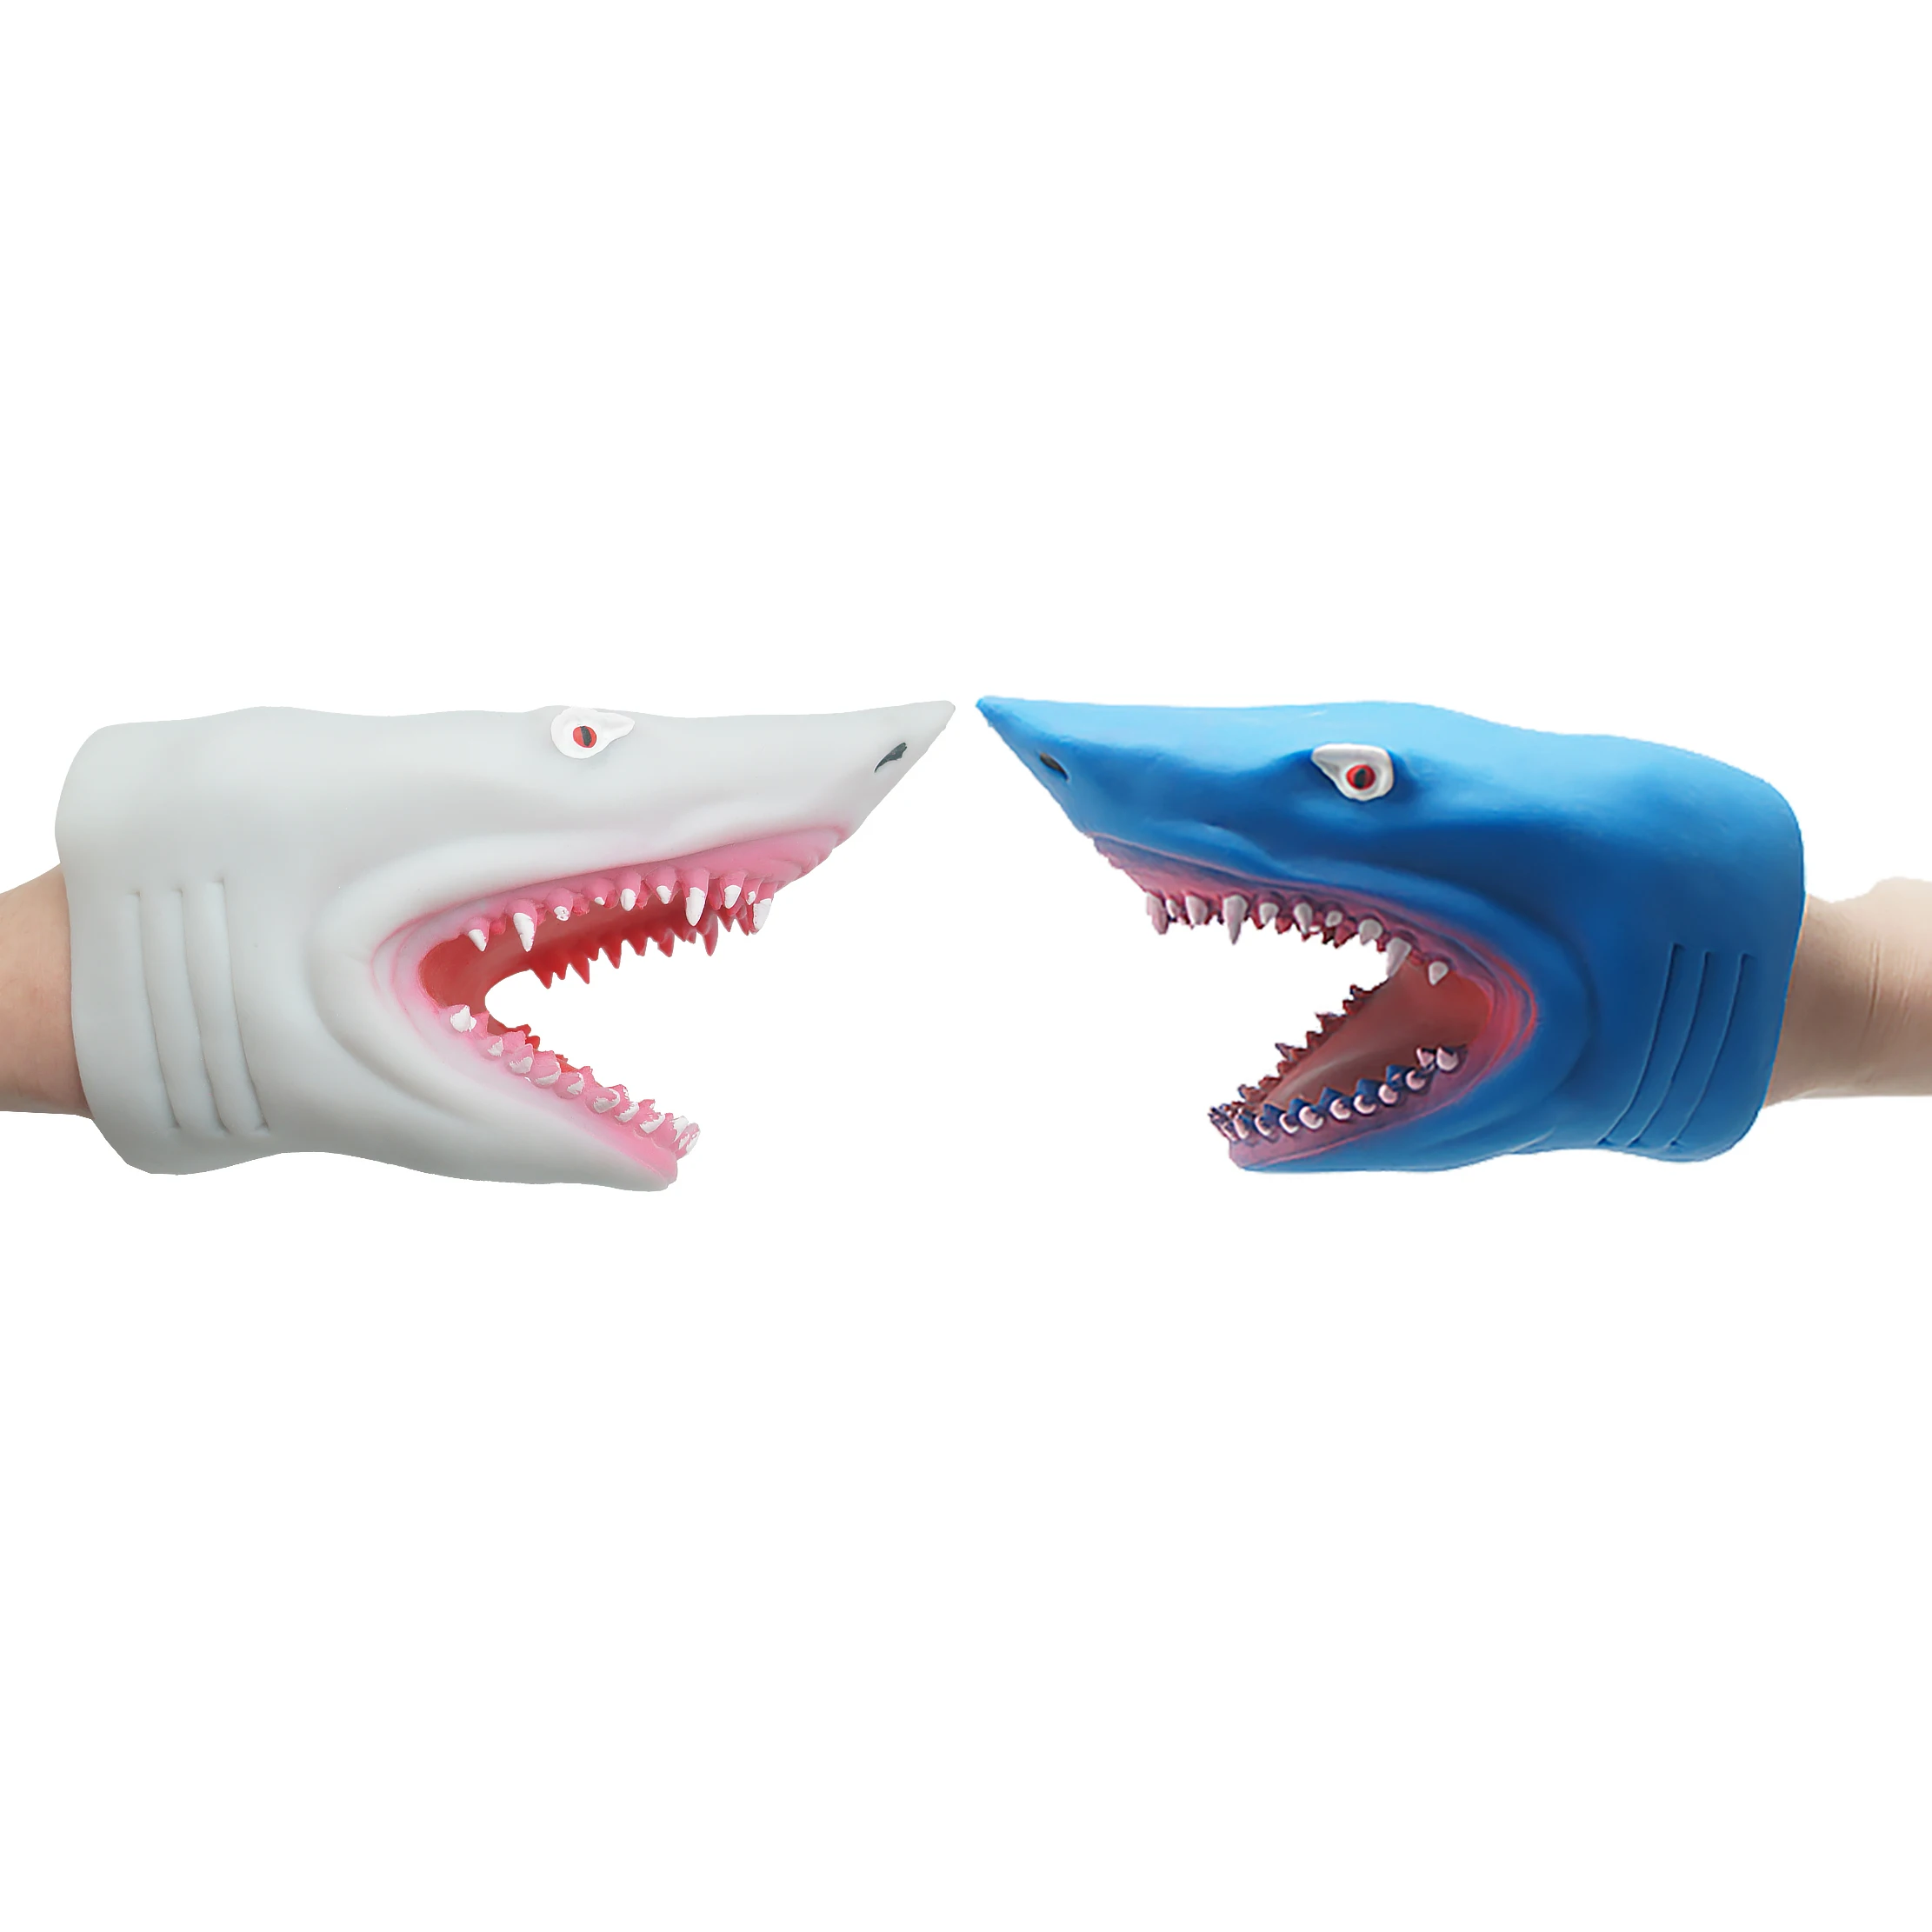 2 Pieces Hand Puppet Toy Role Play Toy Realistic Animal Puppets Soft Rubber Animal Head Beach and Bath Toy for Boys and Girls Scary Shark 